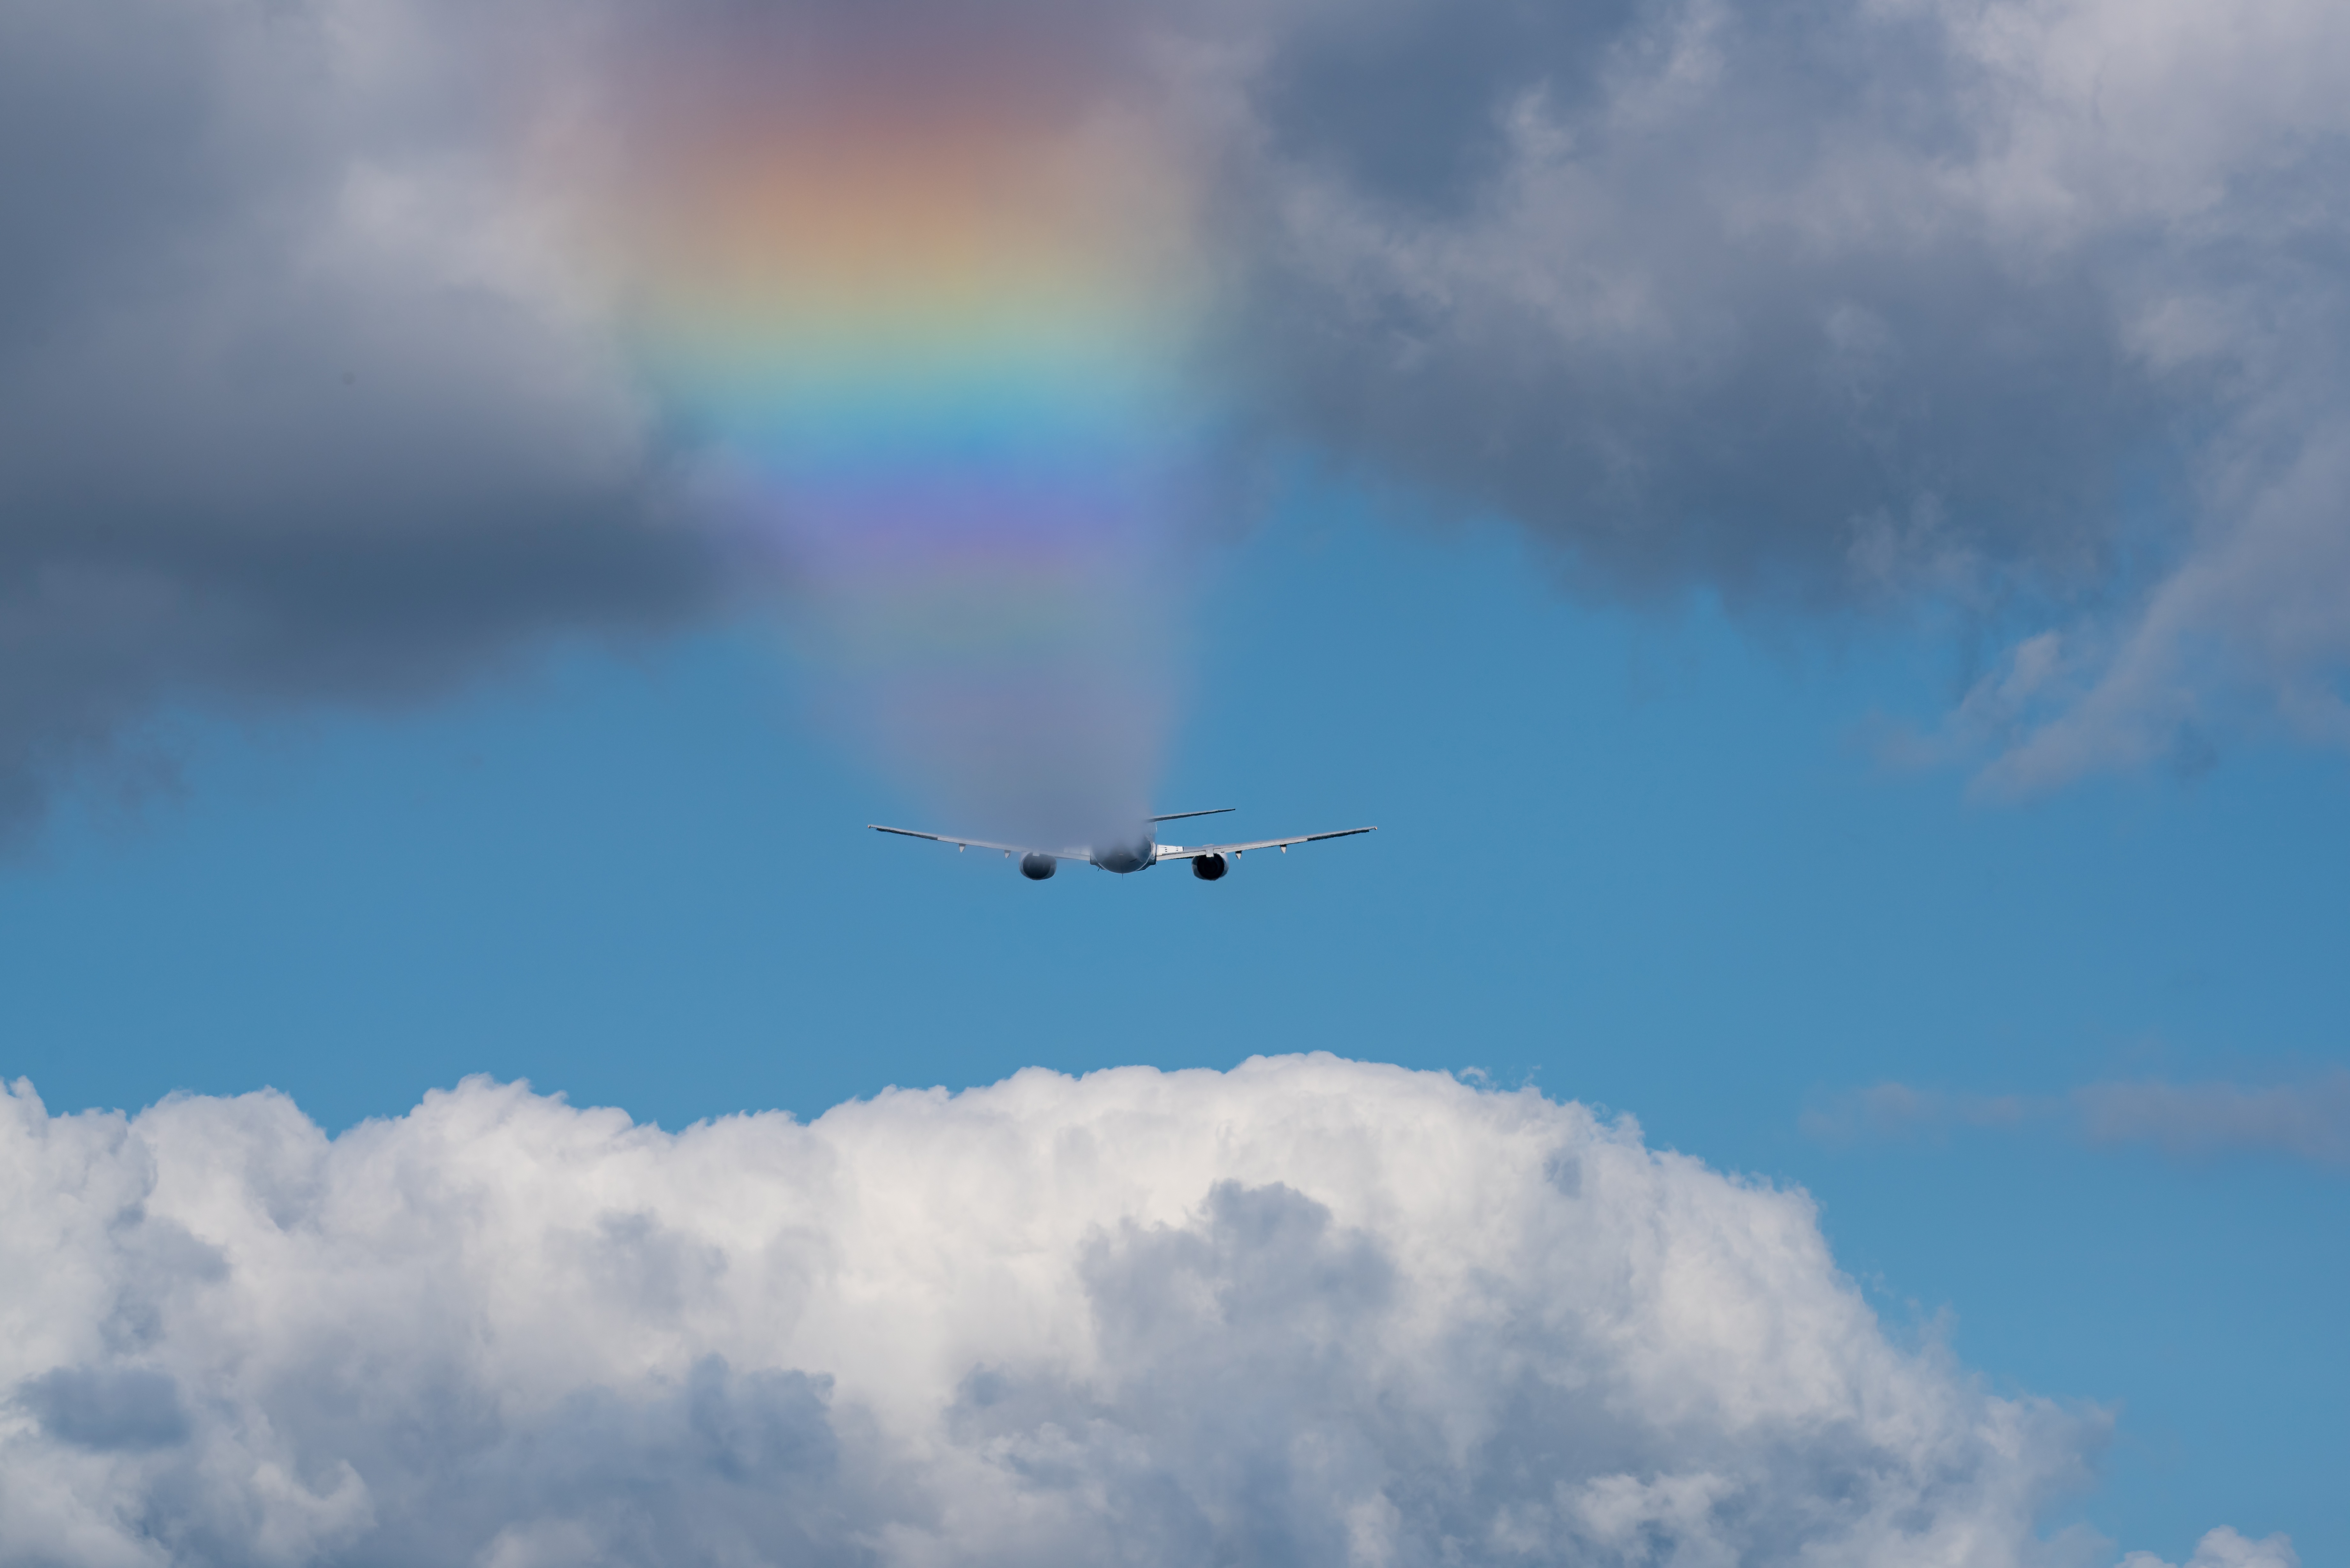 A large jet type plane spraying dispersant over water, creating a rainbow effect in the air